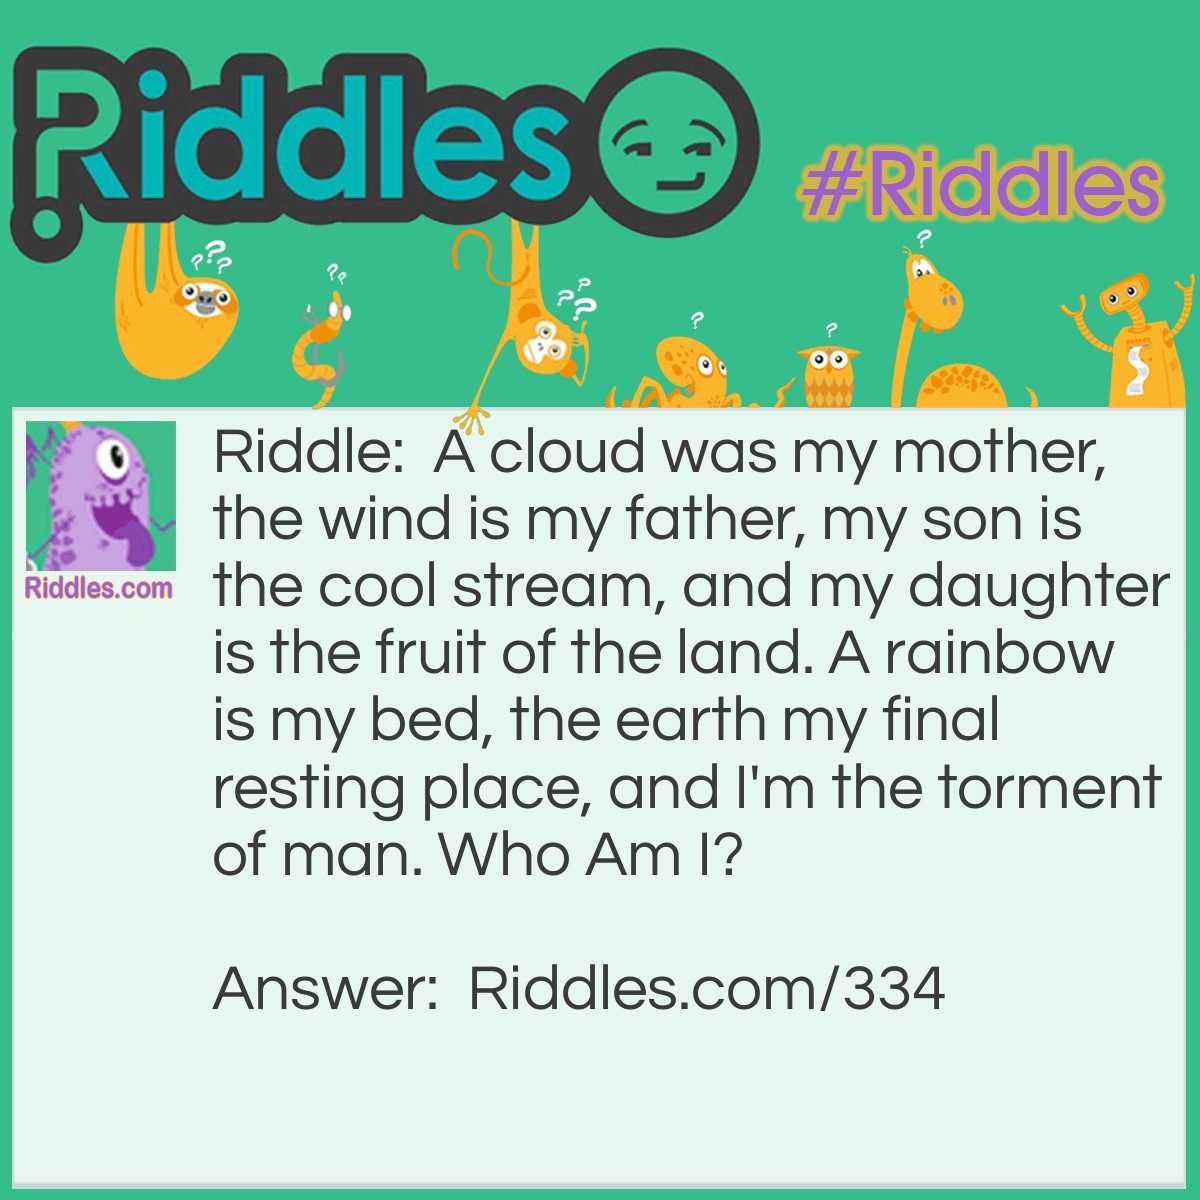 Riddle: A cloud was my mother, the wind is my father, my son is the cool stream, and my daughter is the fruit of the land. A rainbow is my bed, the earth my final resting place, and I'm the torment of man. <a href="https://www.riddles.com/who-am-i-riddles">Who Am I</a>? Answer: Rain.